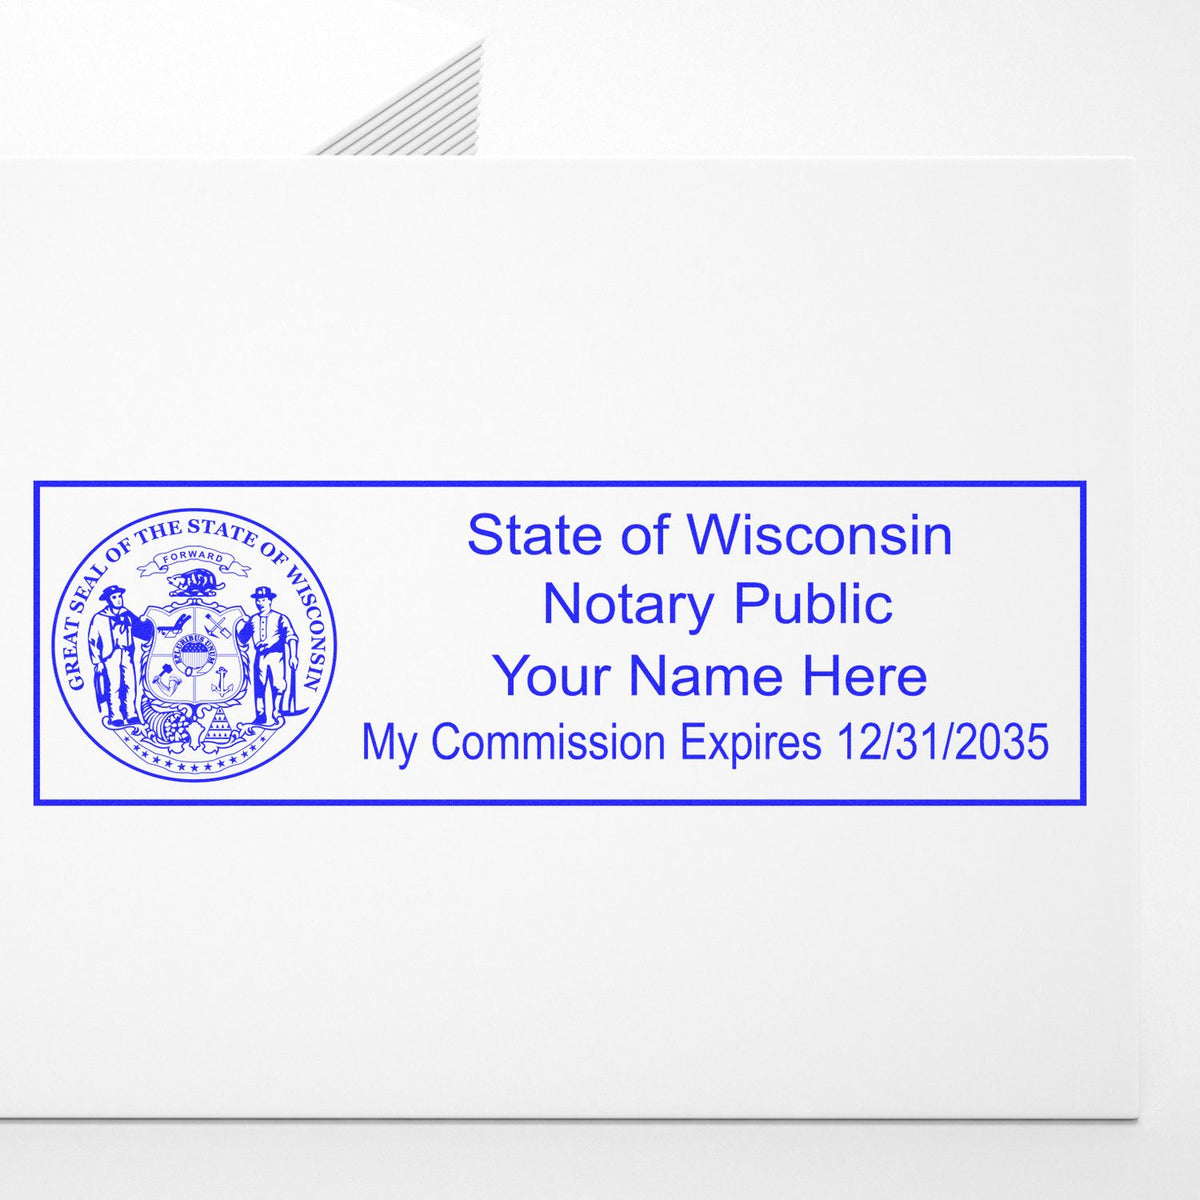 The MaxLight Premium Pre-Inked Wisconsin State Seal Notarial Stamp stamp impression comes to life with a crisp, detailed photo on paper - showcasing true professional quality.